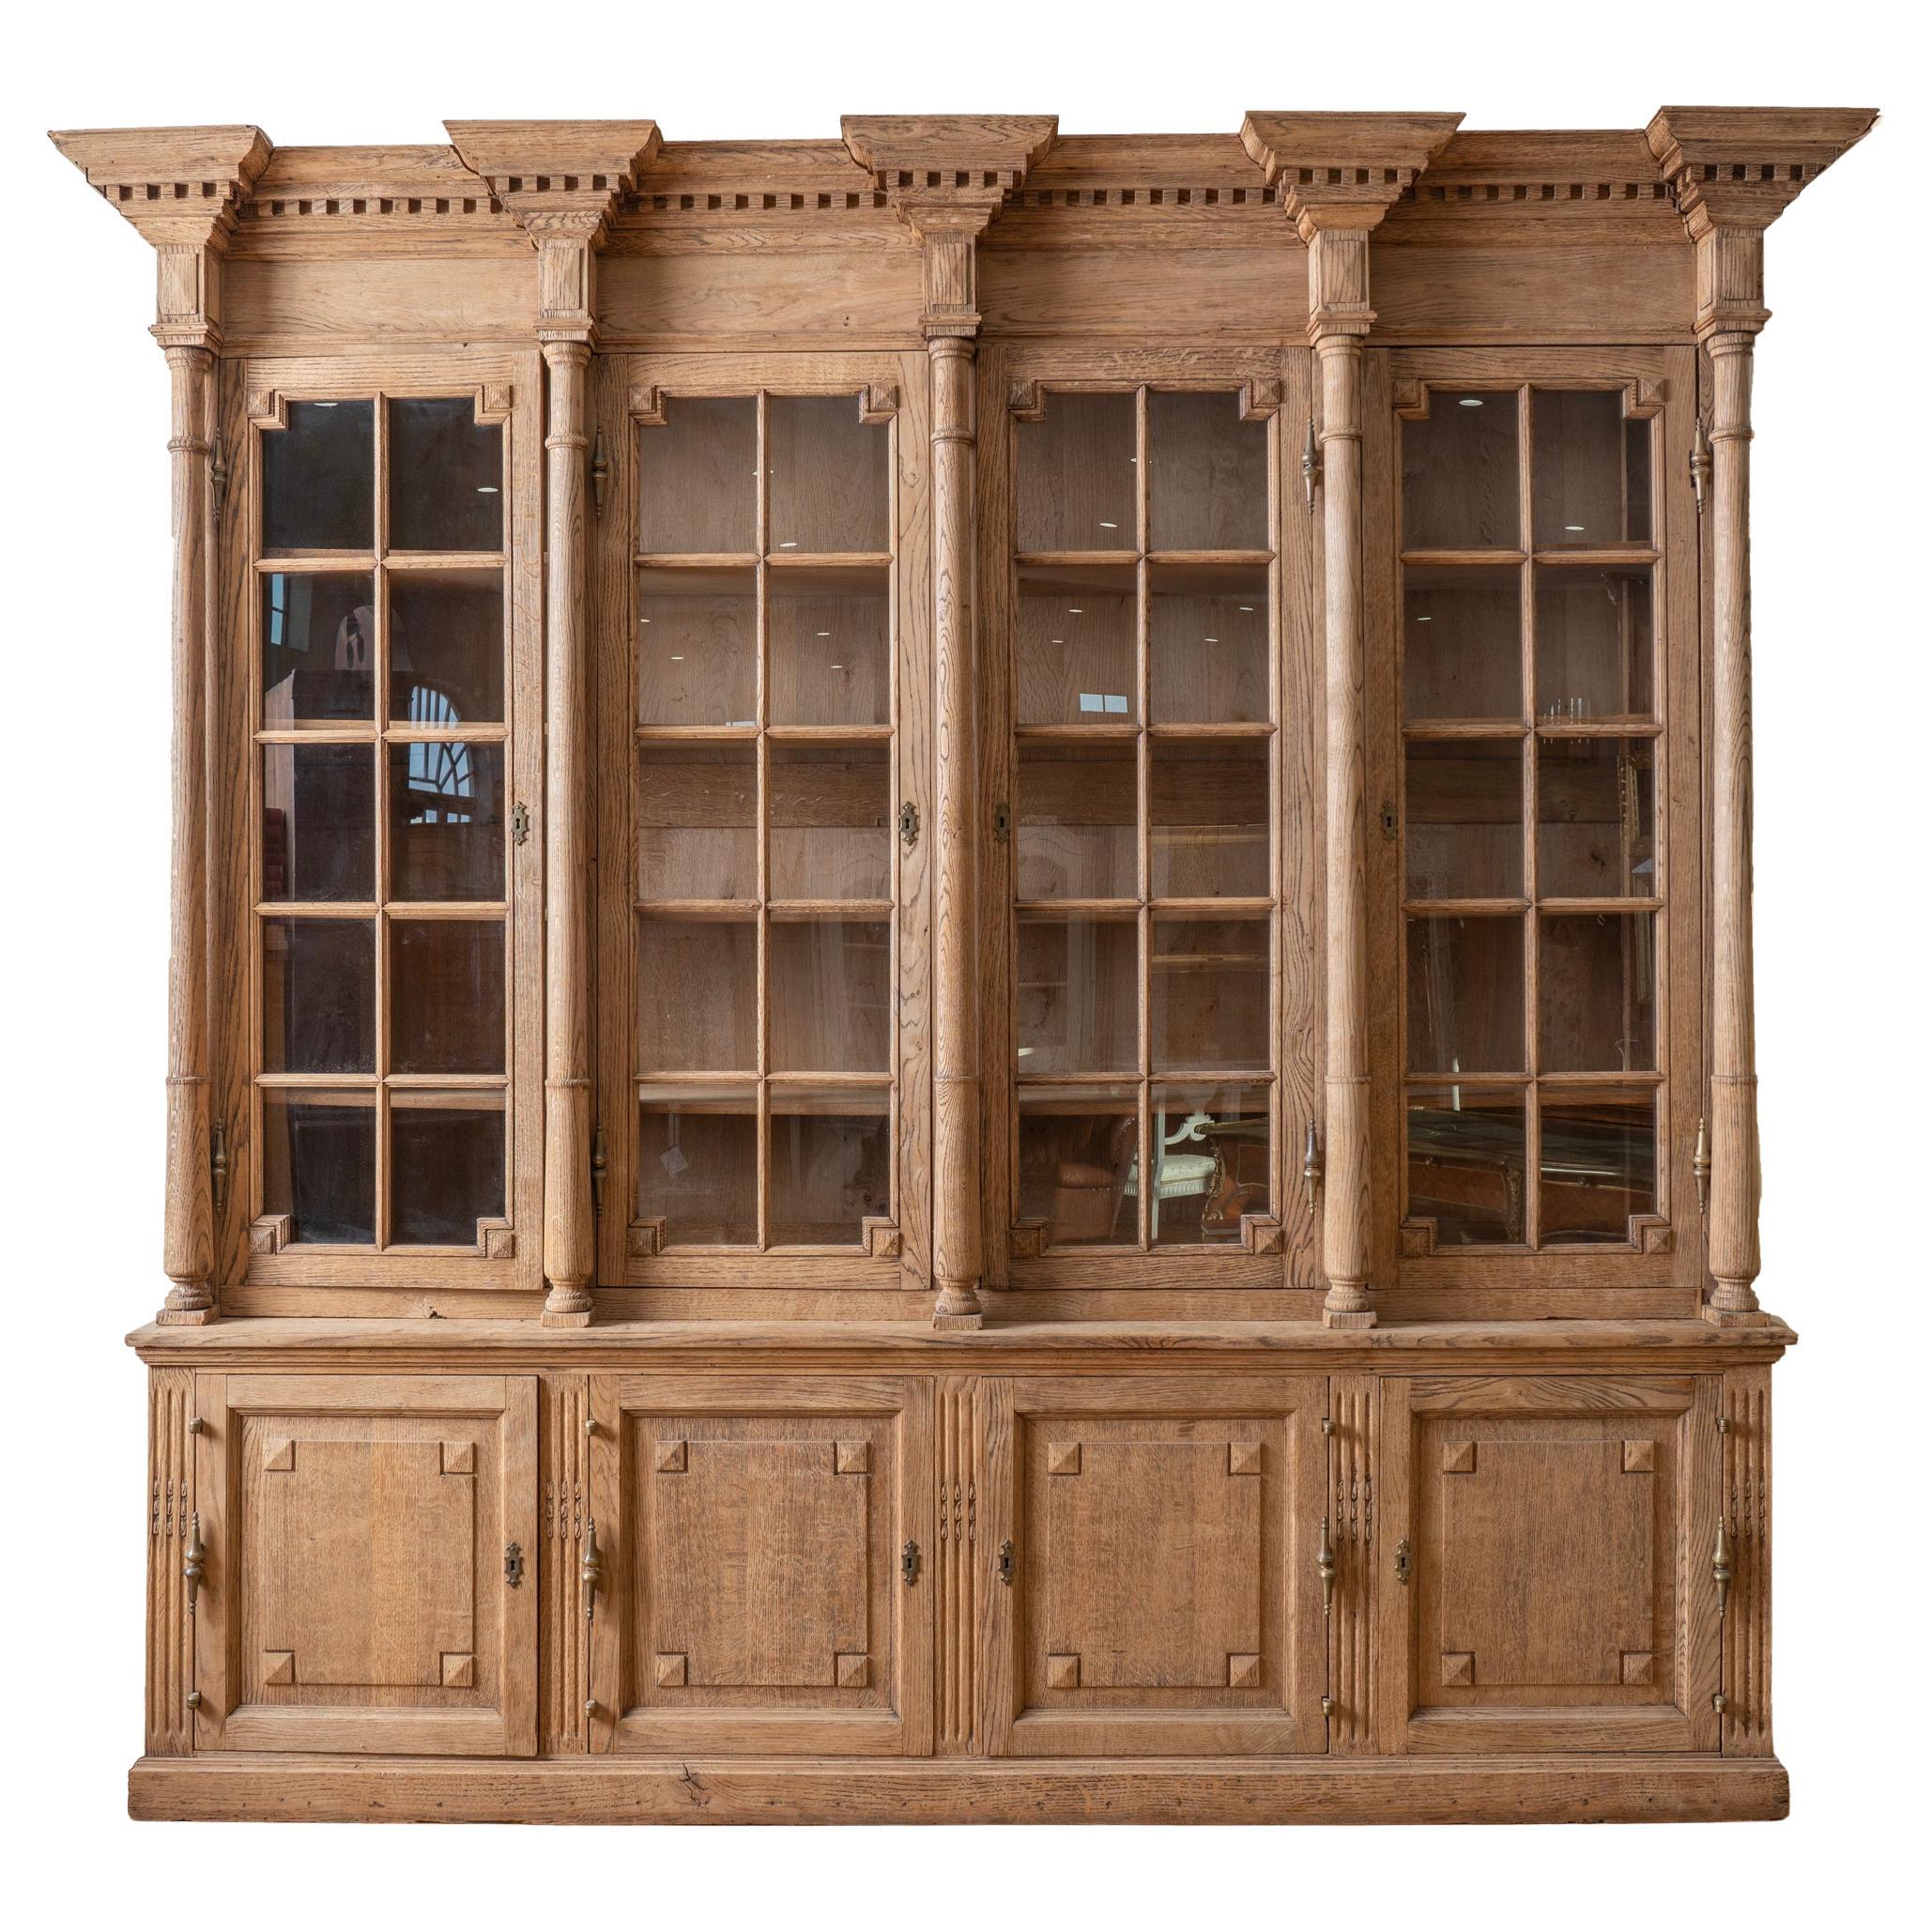 Antique Tall Bleached Oak Bookcase Display Cabinet from France, circa 1900's